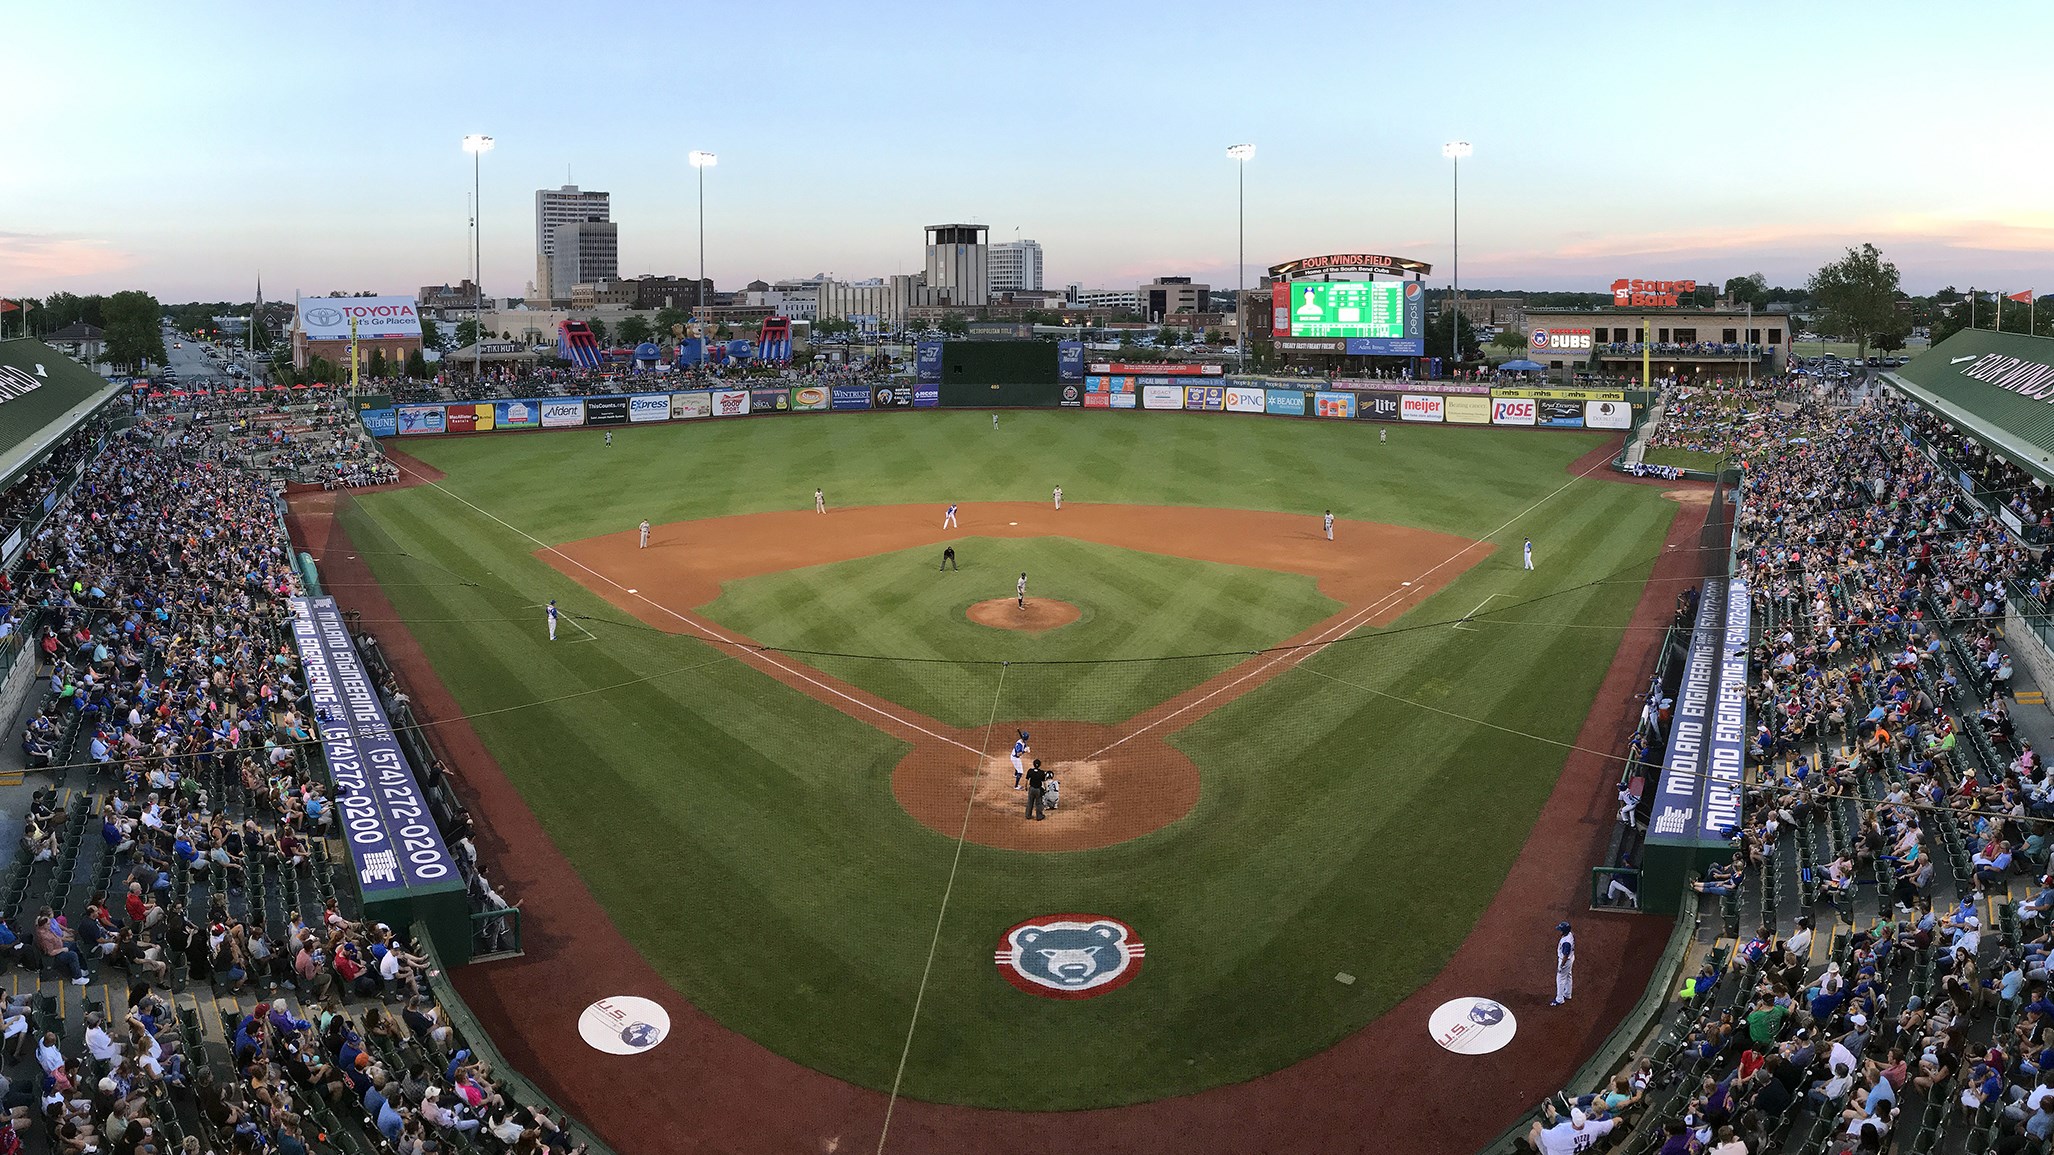 The Cubs will host two exhibition games at the South Bend